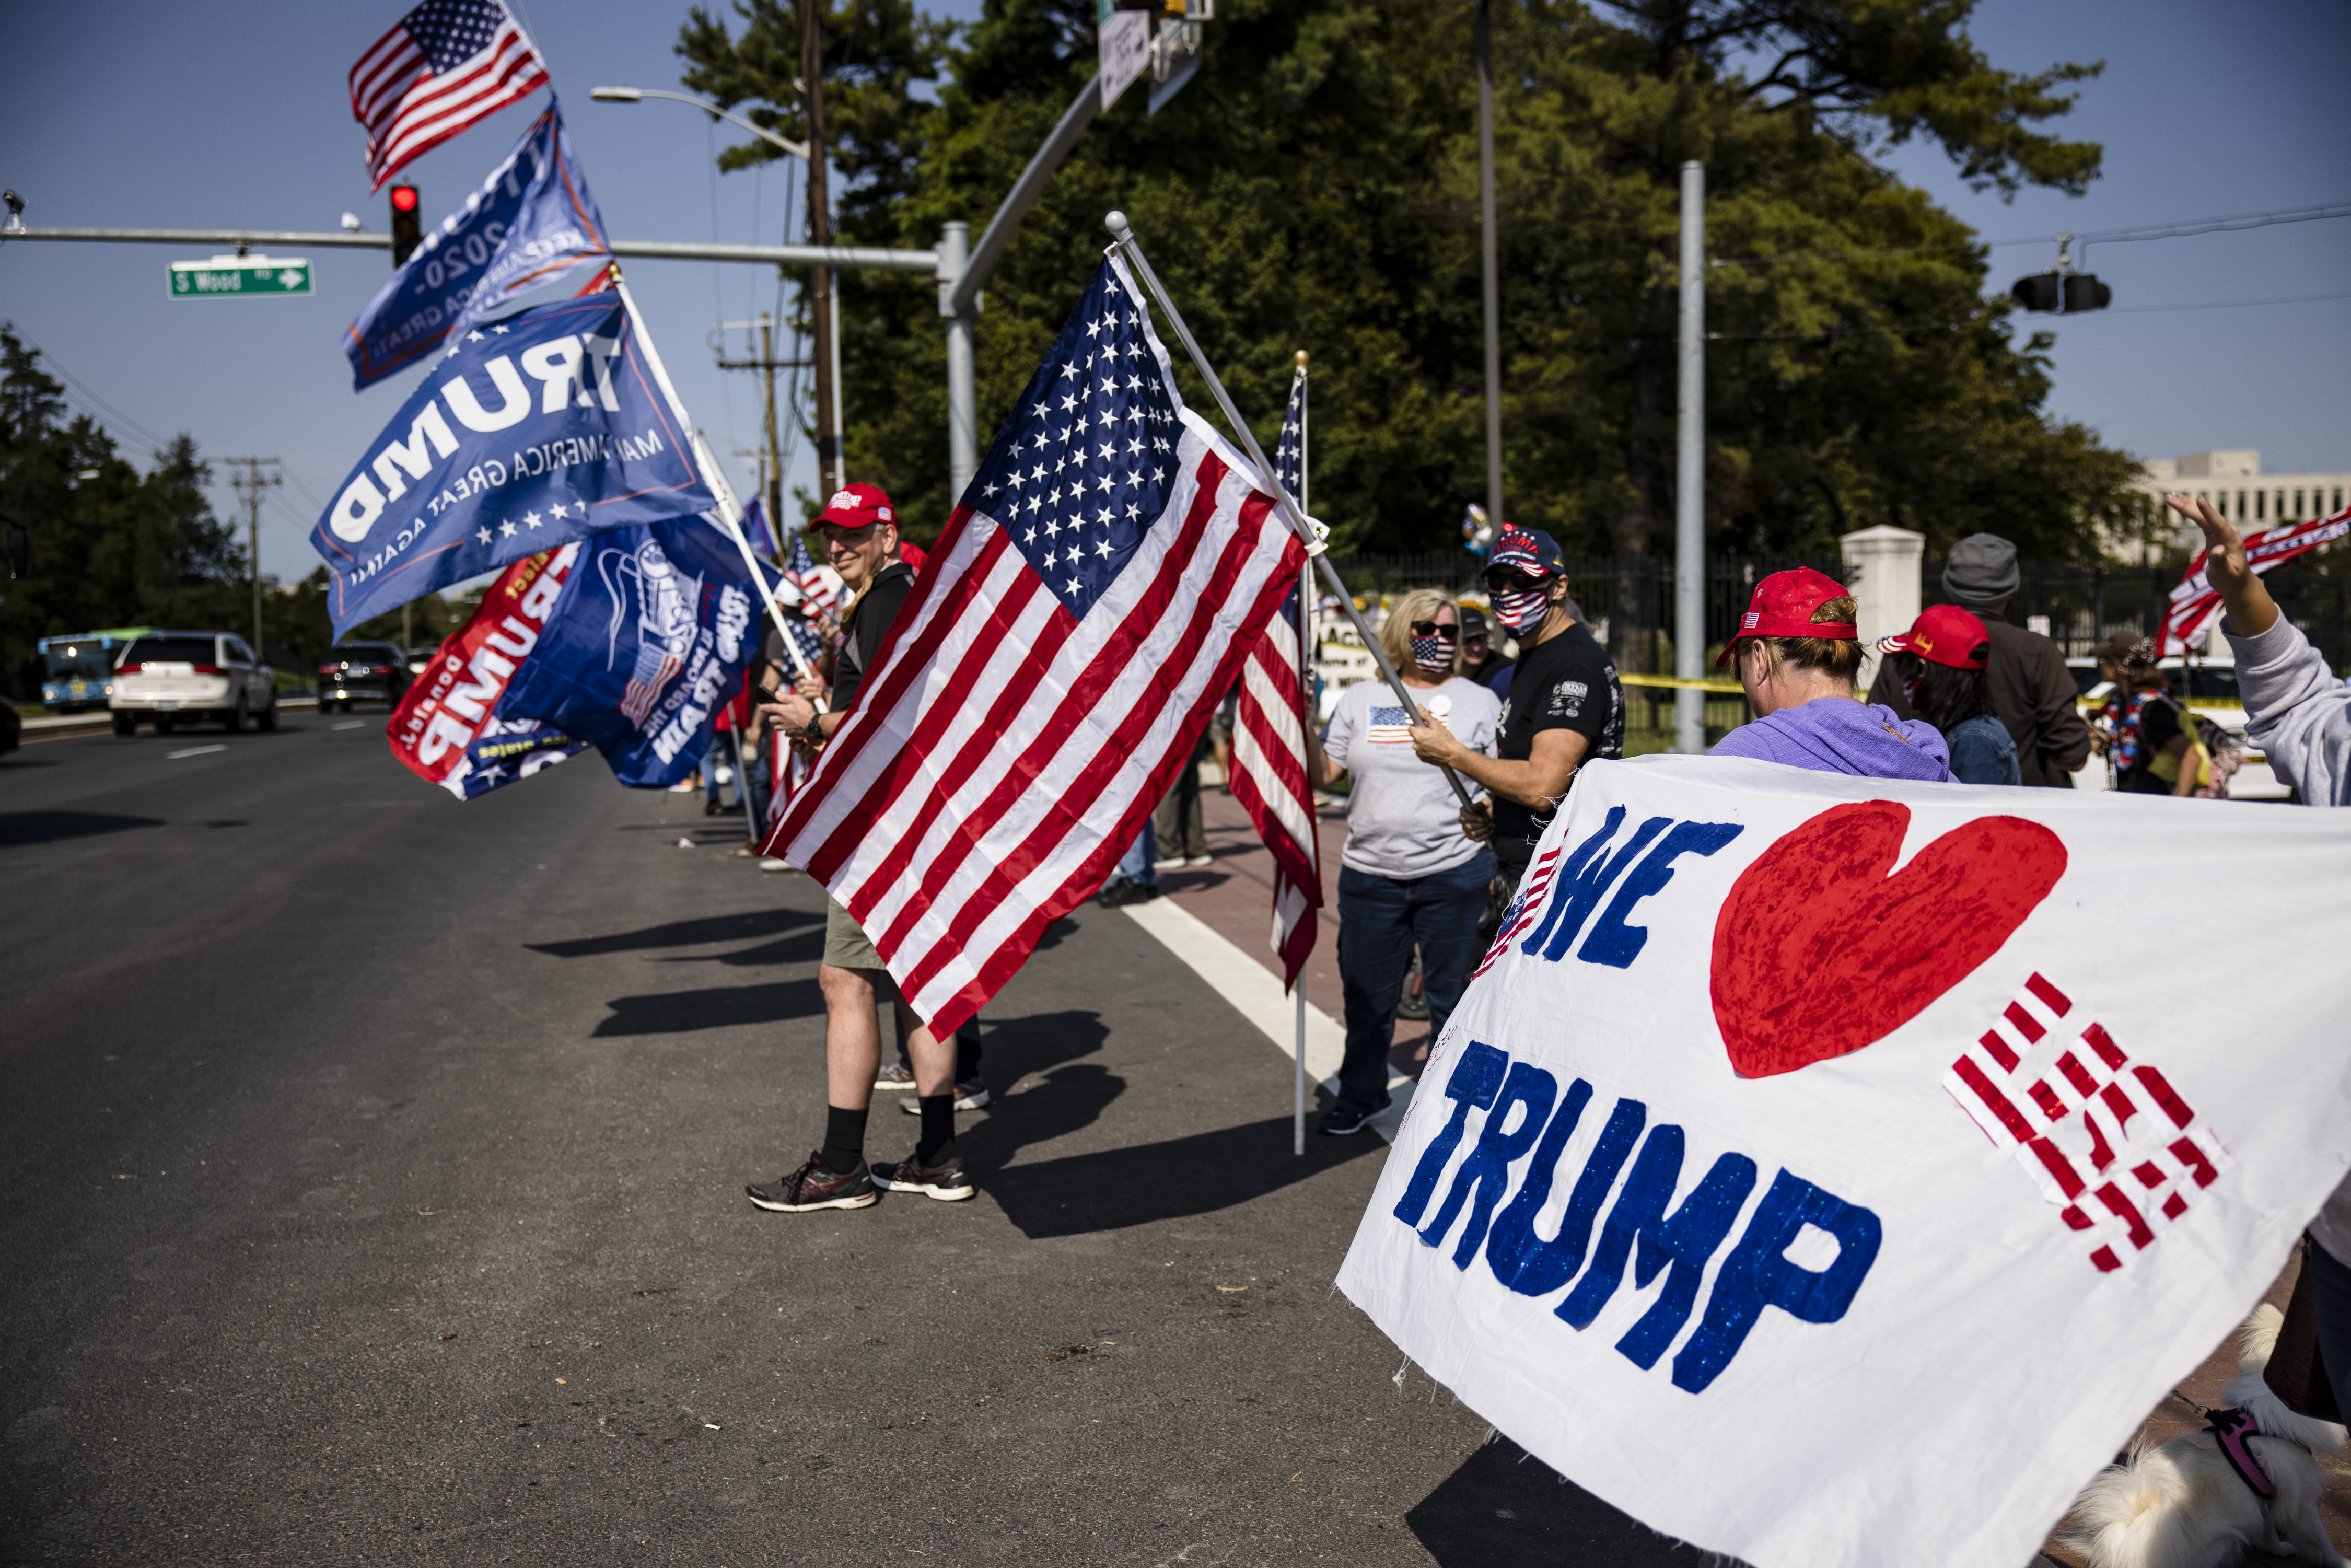 Donald Trump Greets Supporters Outside Of Hospital In Drive-By Photo-Op